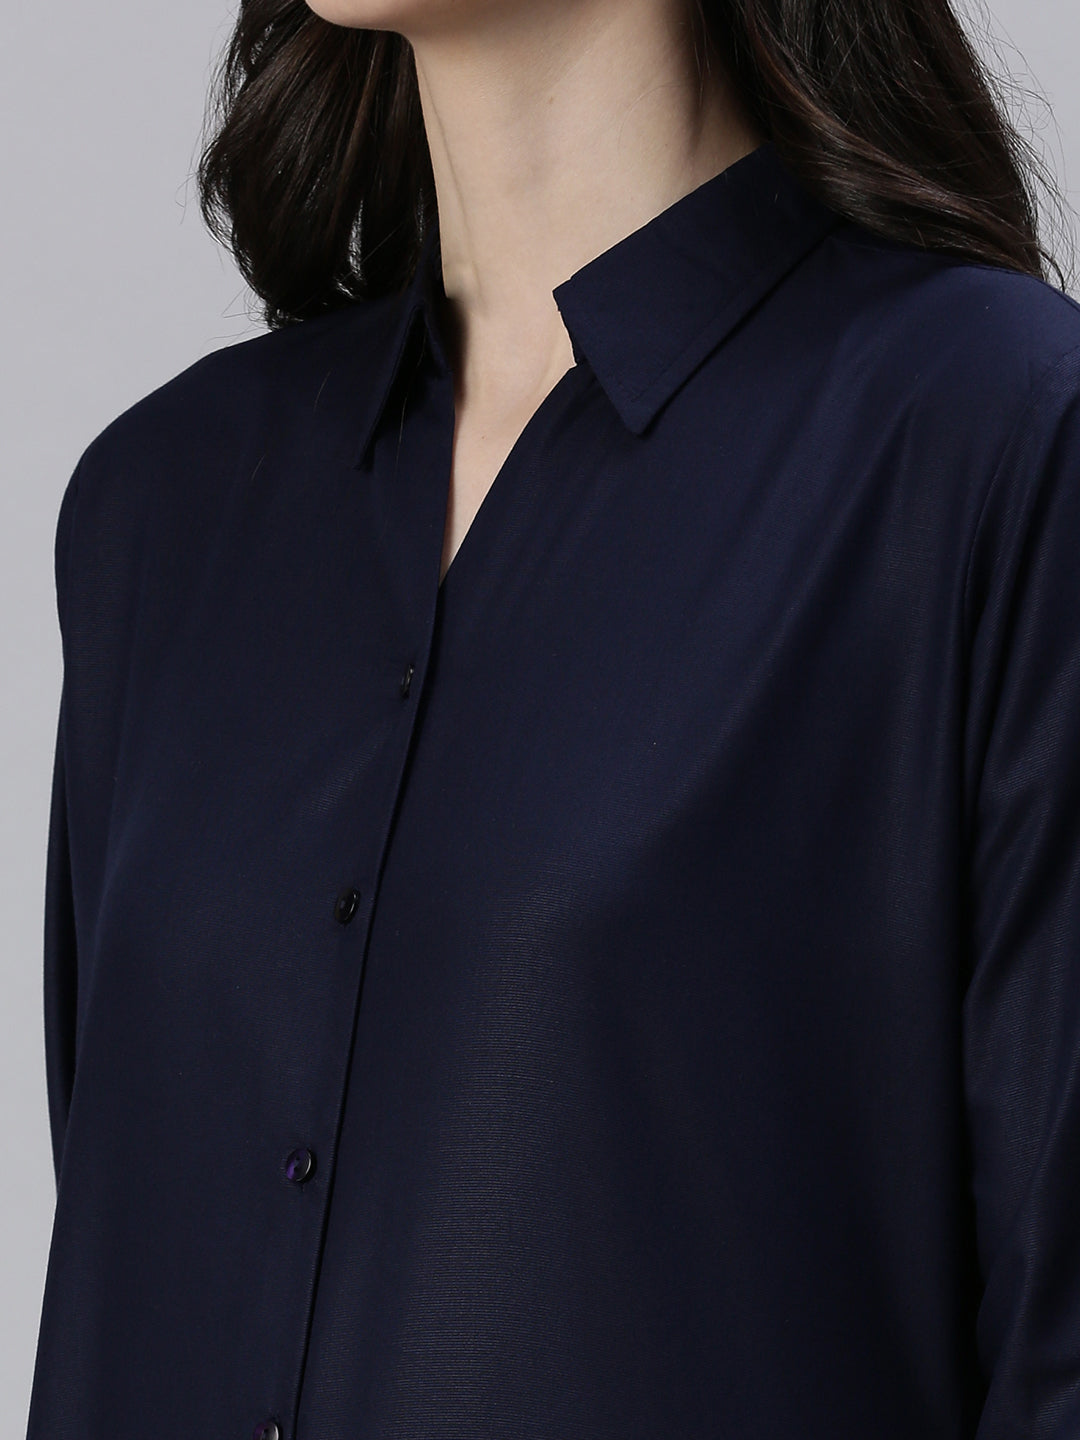 Women's Navy Blue Solid Casual Shirts